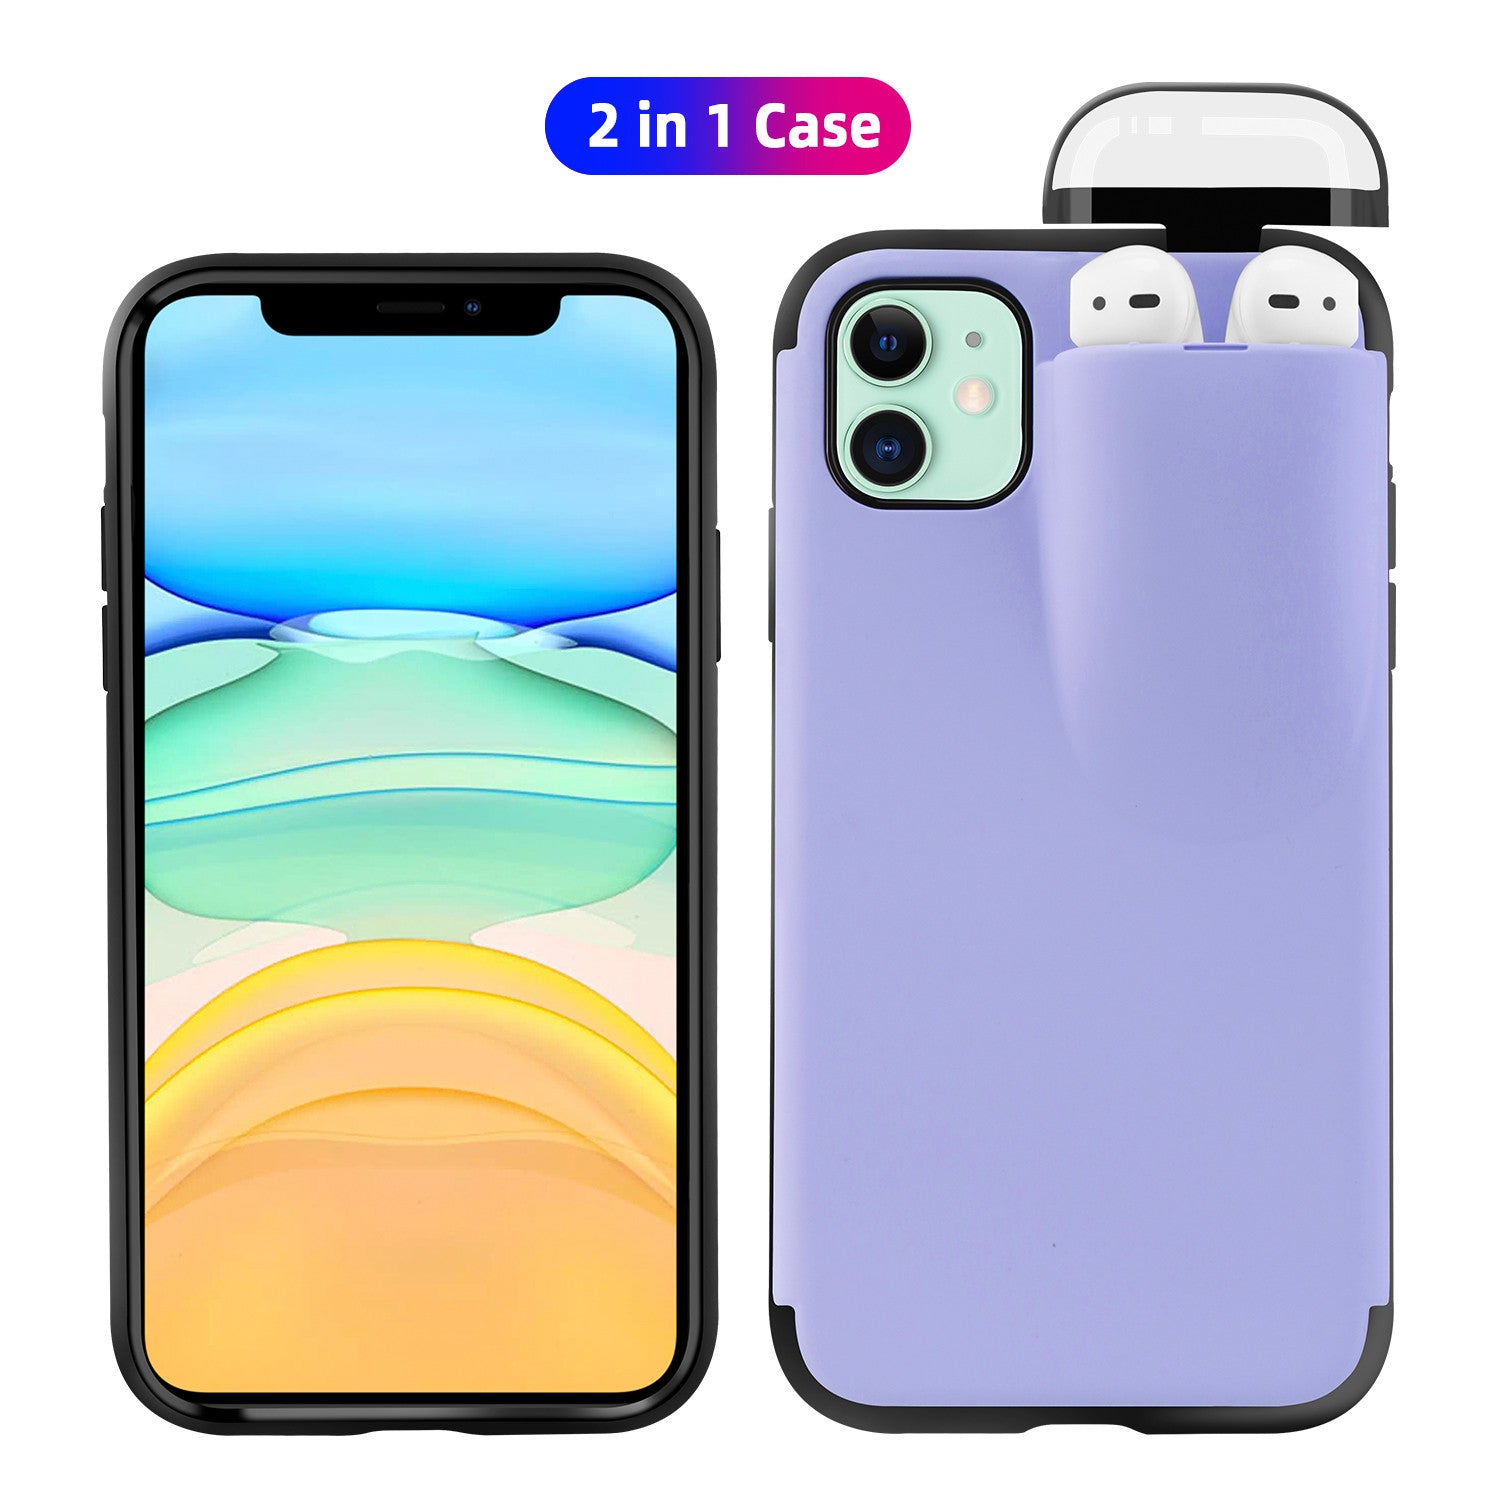 Airpod Holder Case Lilac